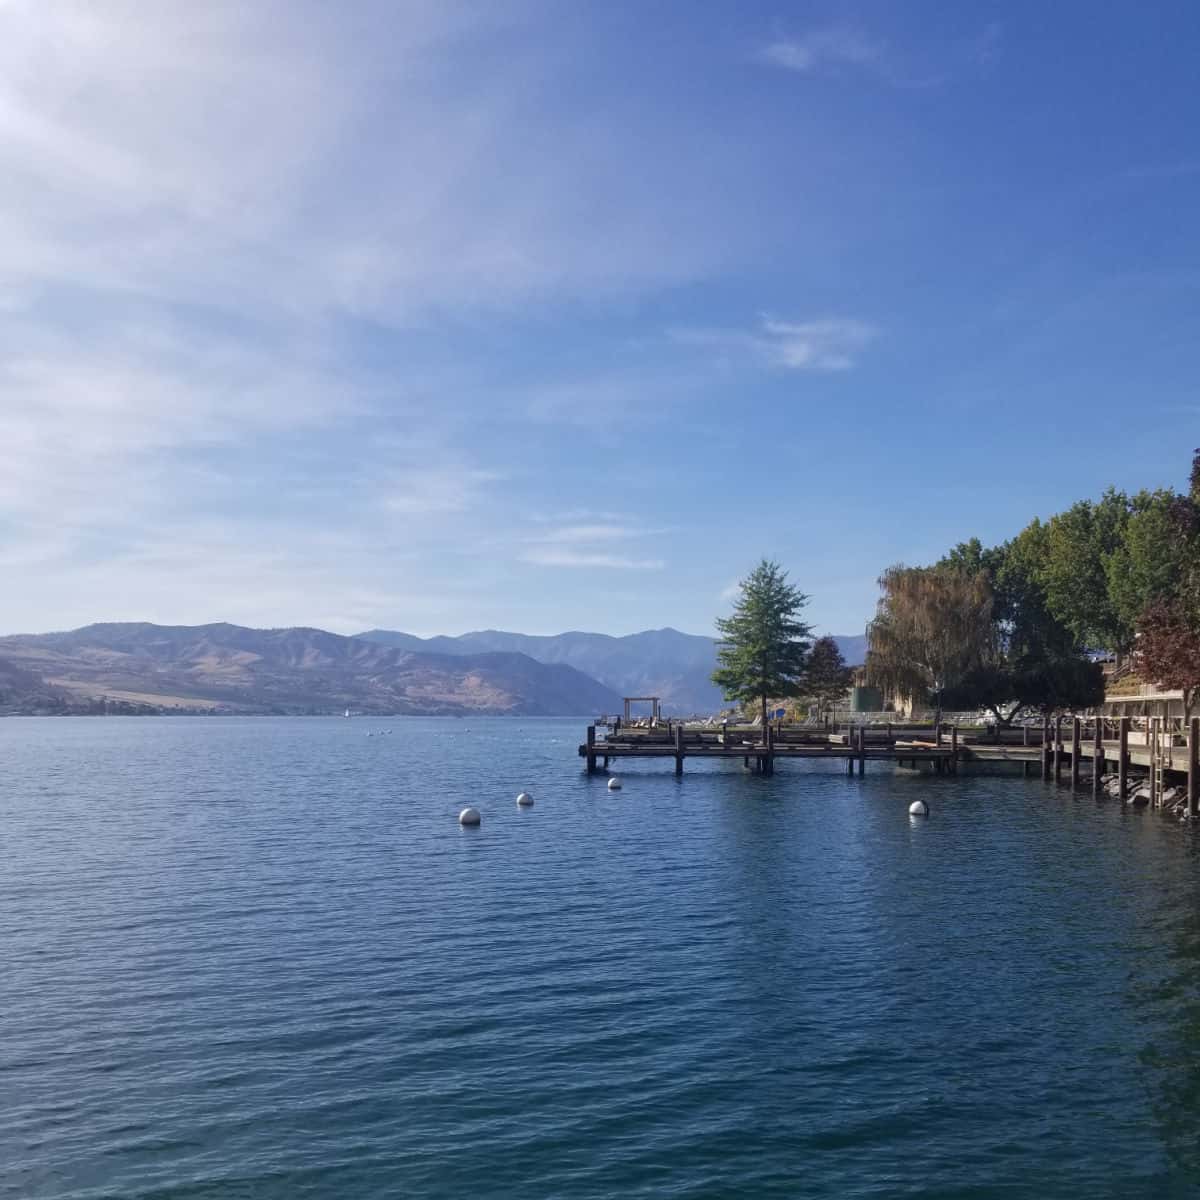 Looking down the lake with a dock on the side and mountains in the backgroun